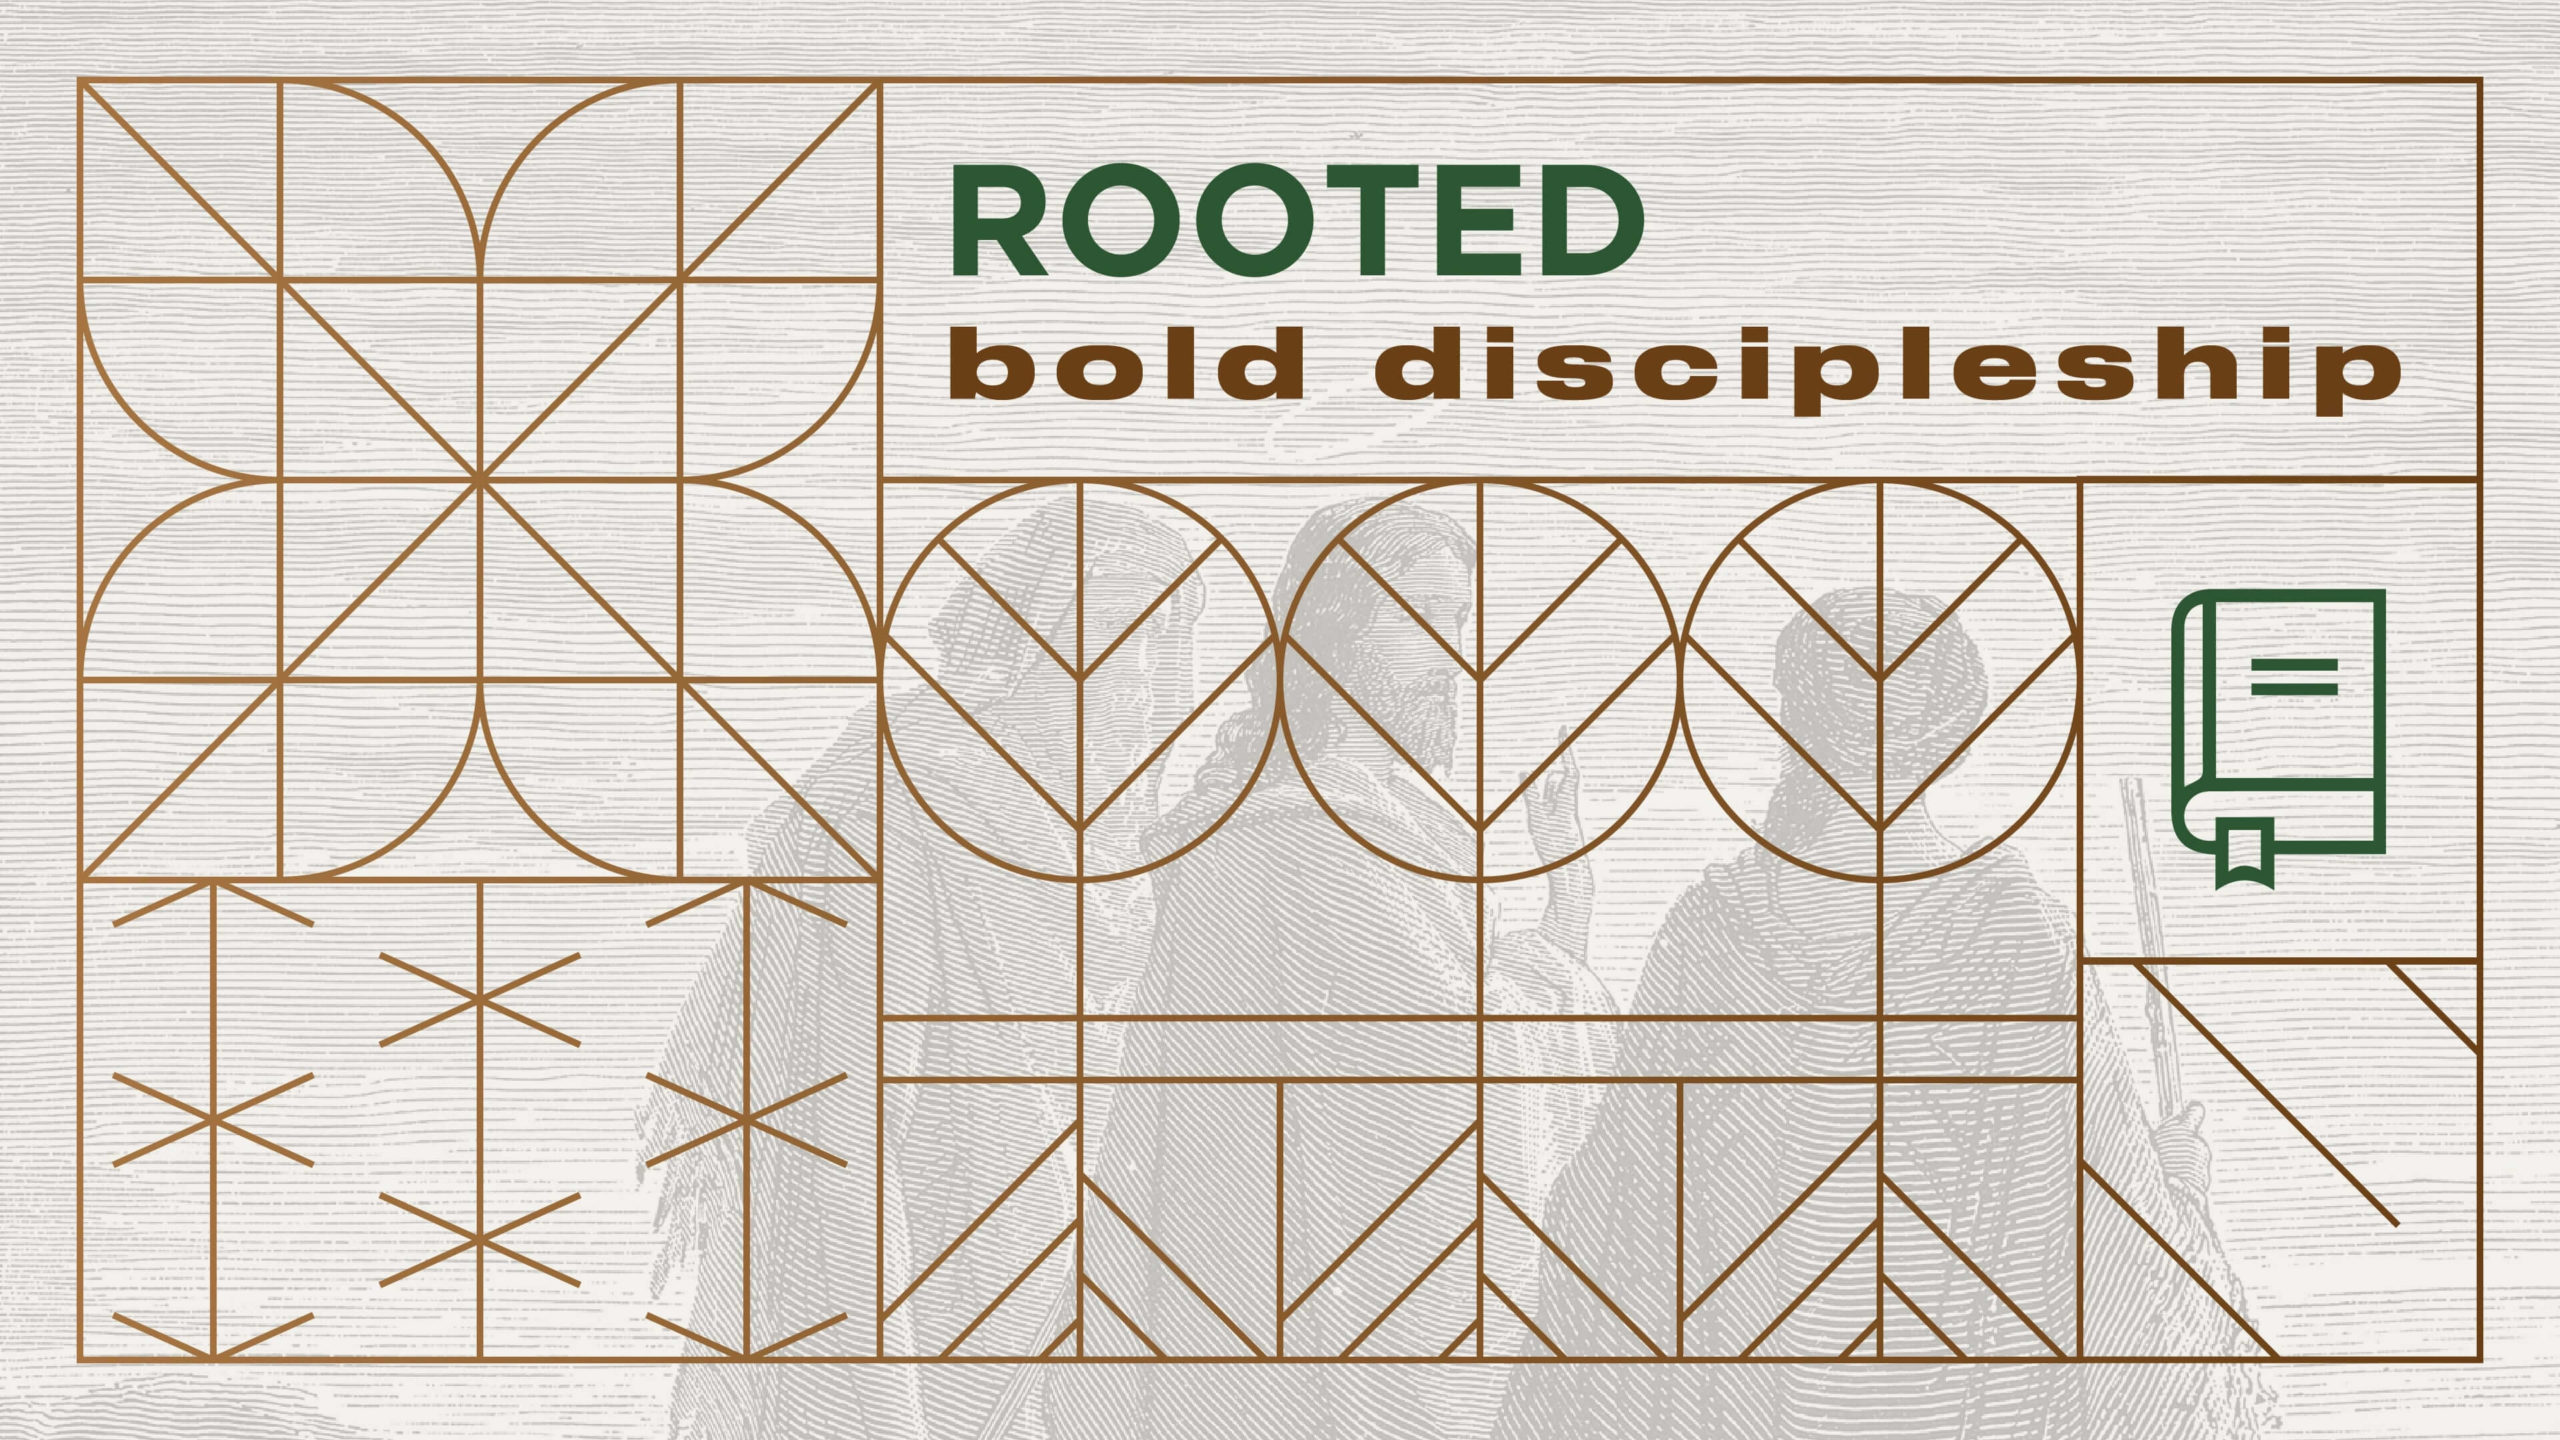 9:30- Rooted Kick Off